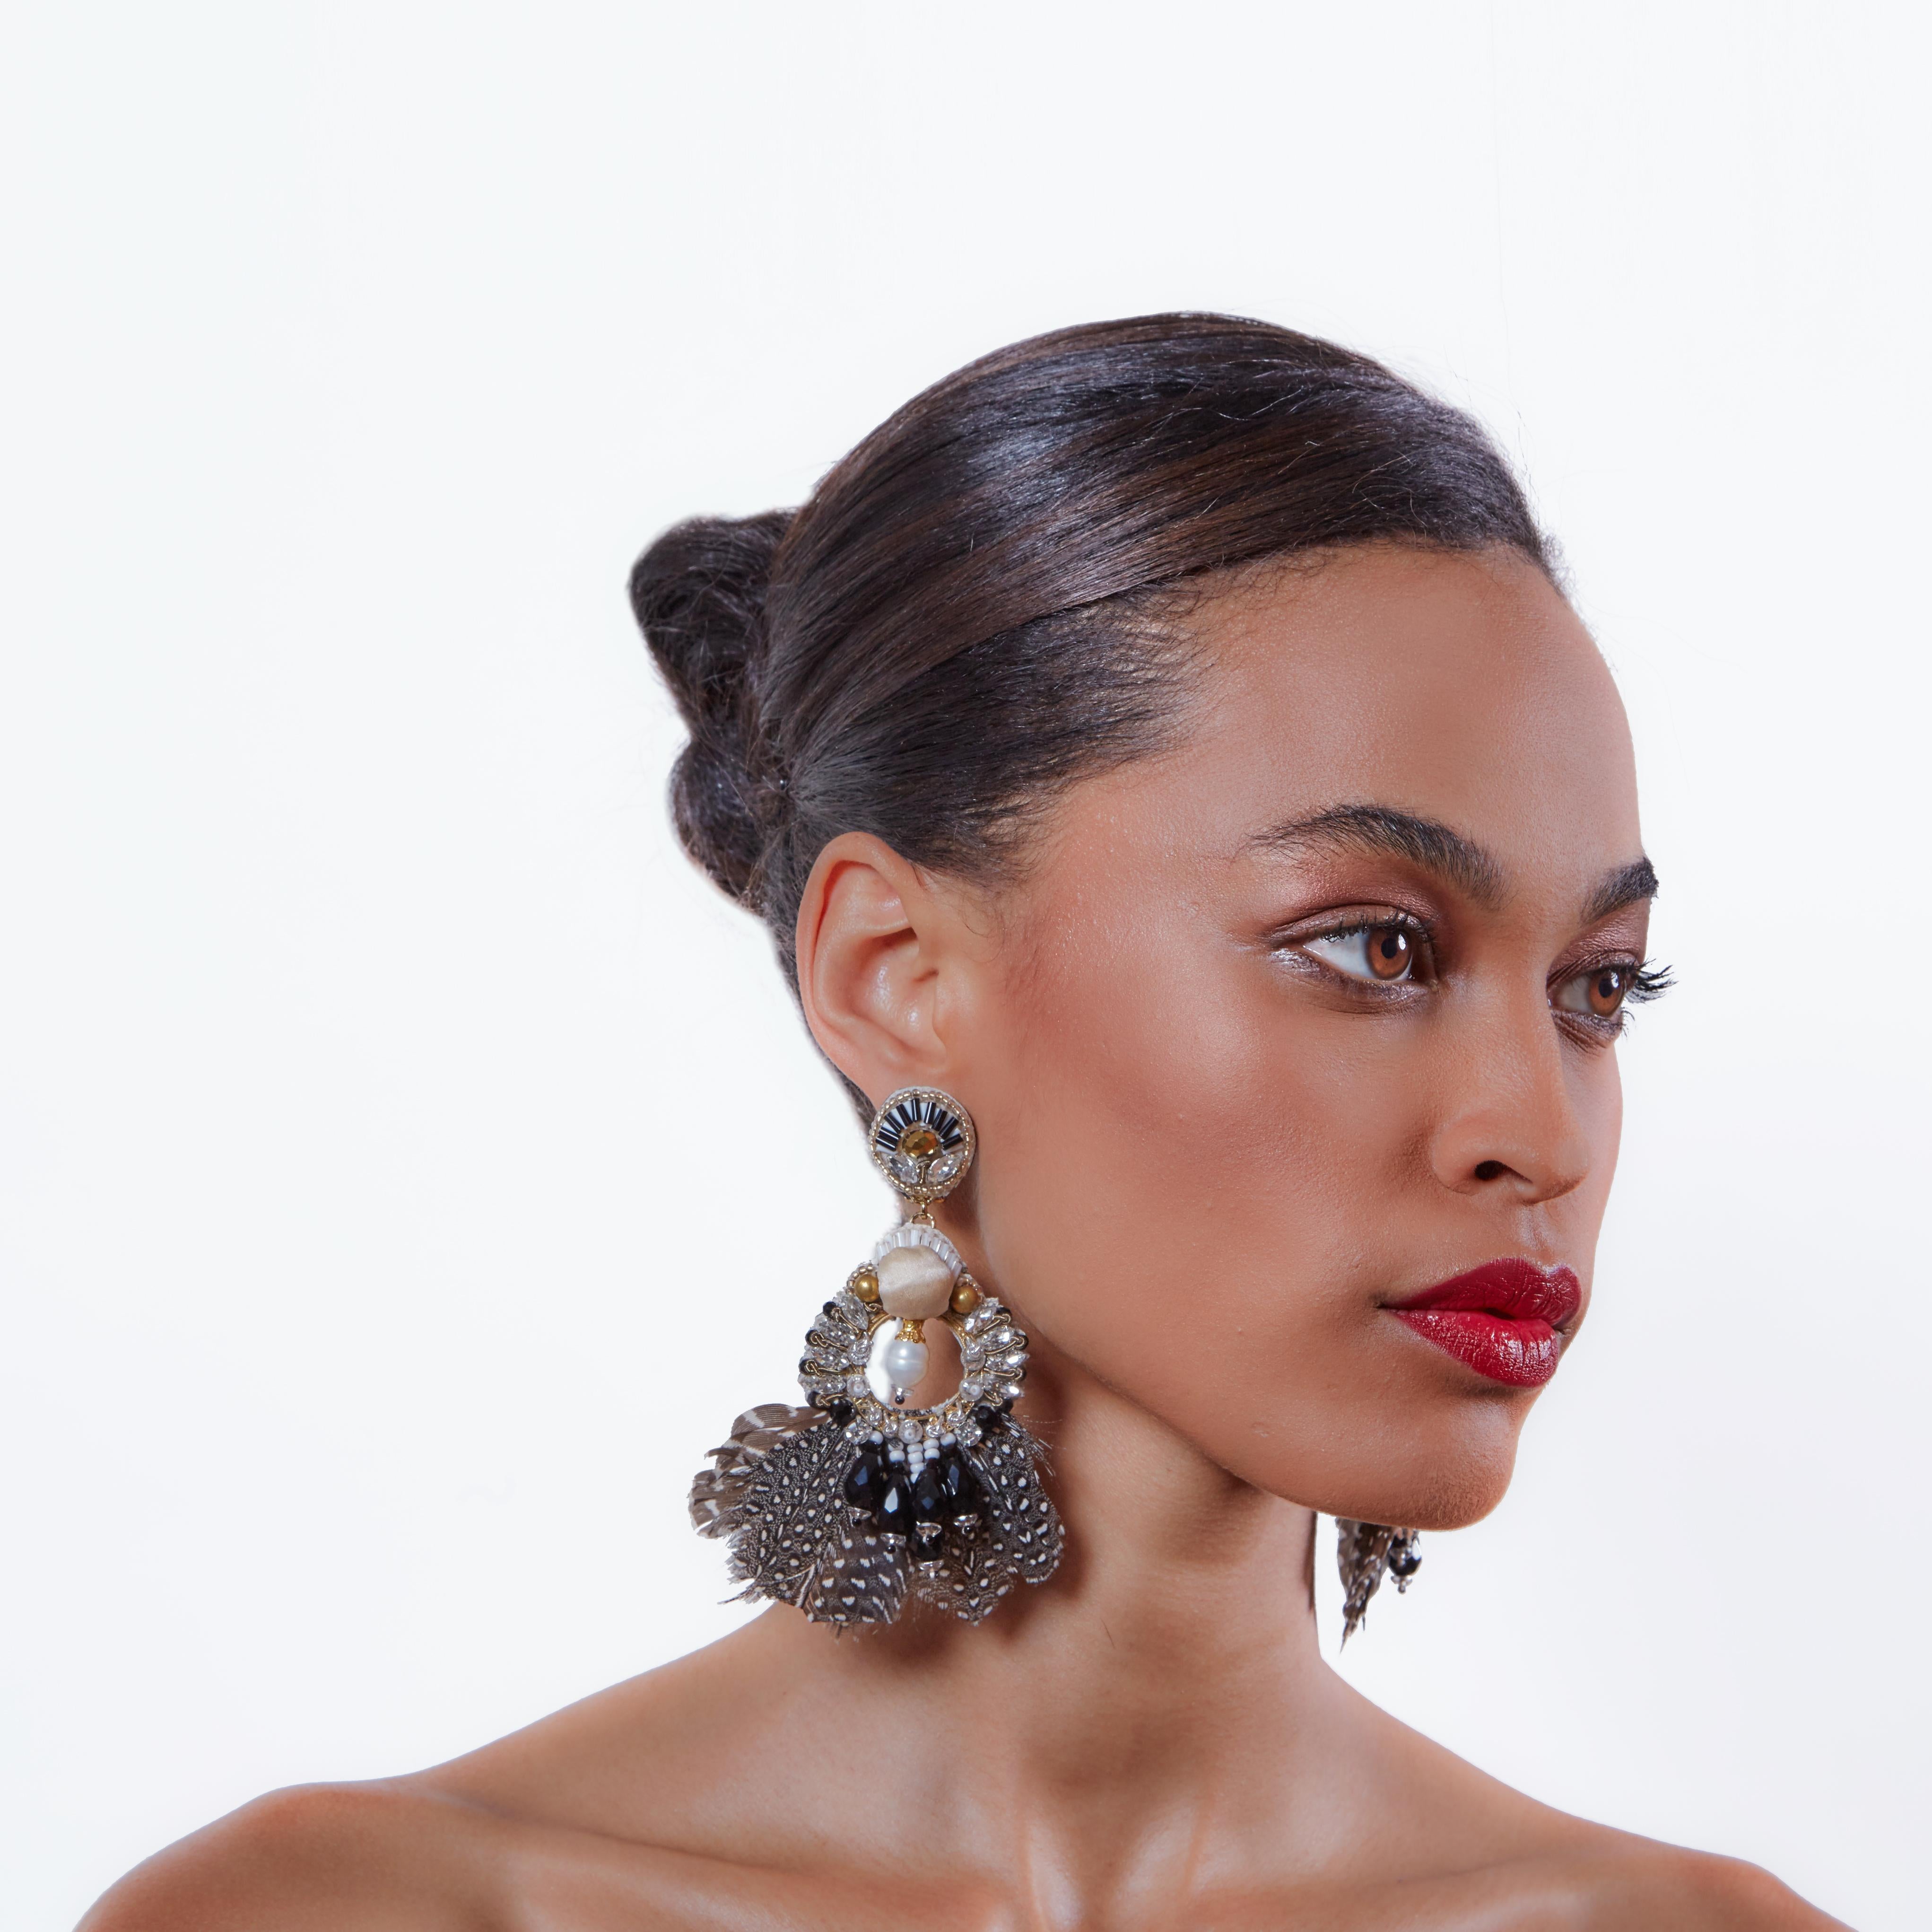 Make a subtle statement with the Carambola earring. Adorned with Mother-of-Pearl and Guinea feathers, Carambola makes the perfect statement for Fall. 